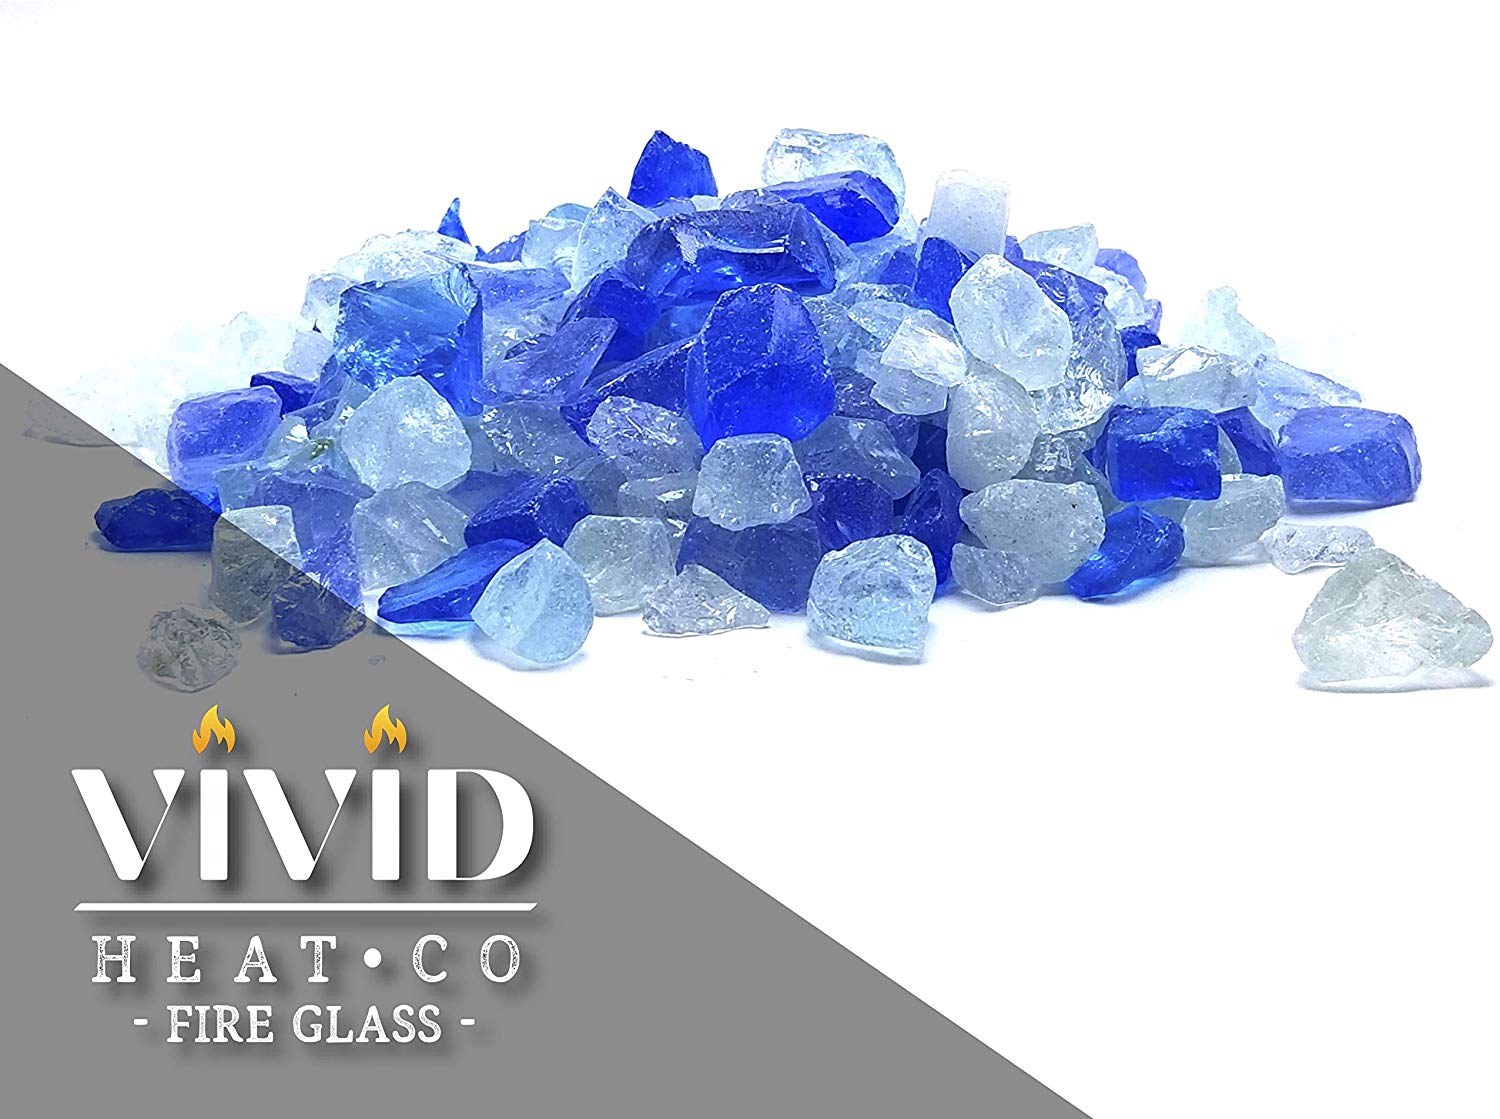 Bahama Blend 1/2" - 3/4" Large Premium Fire Glass for Fireplace and Fire Pit